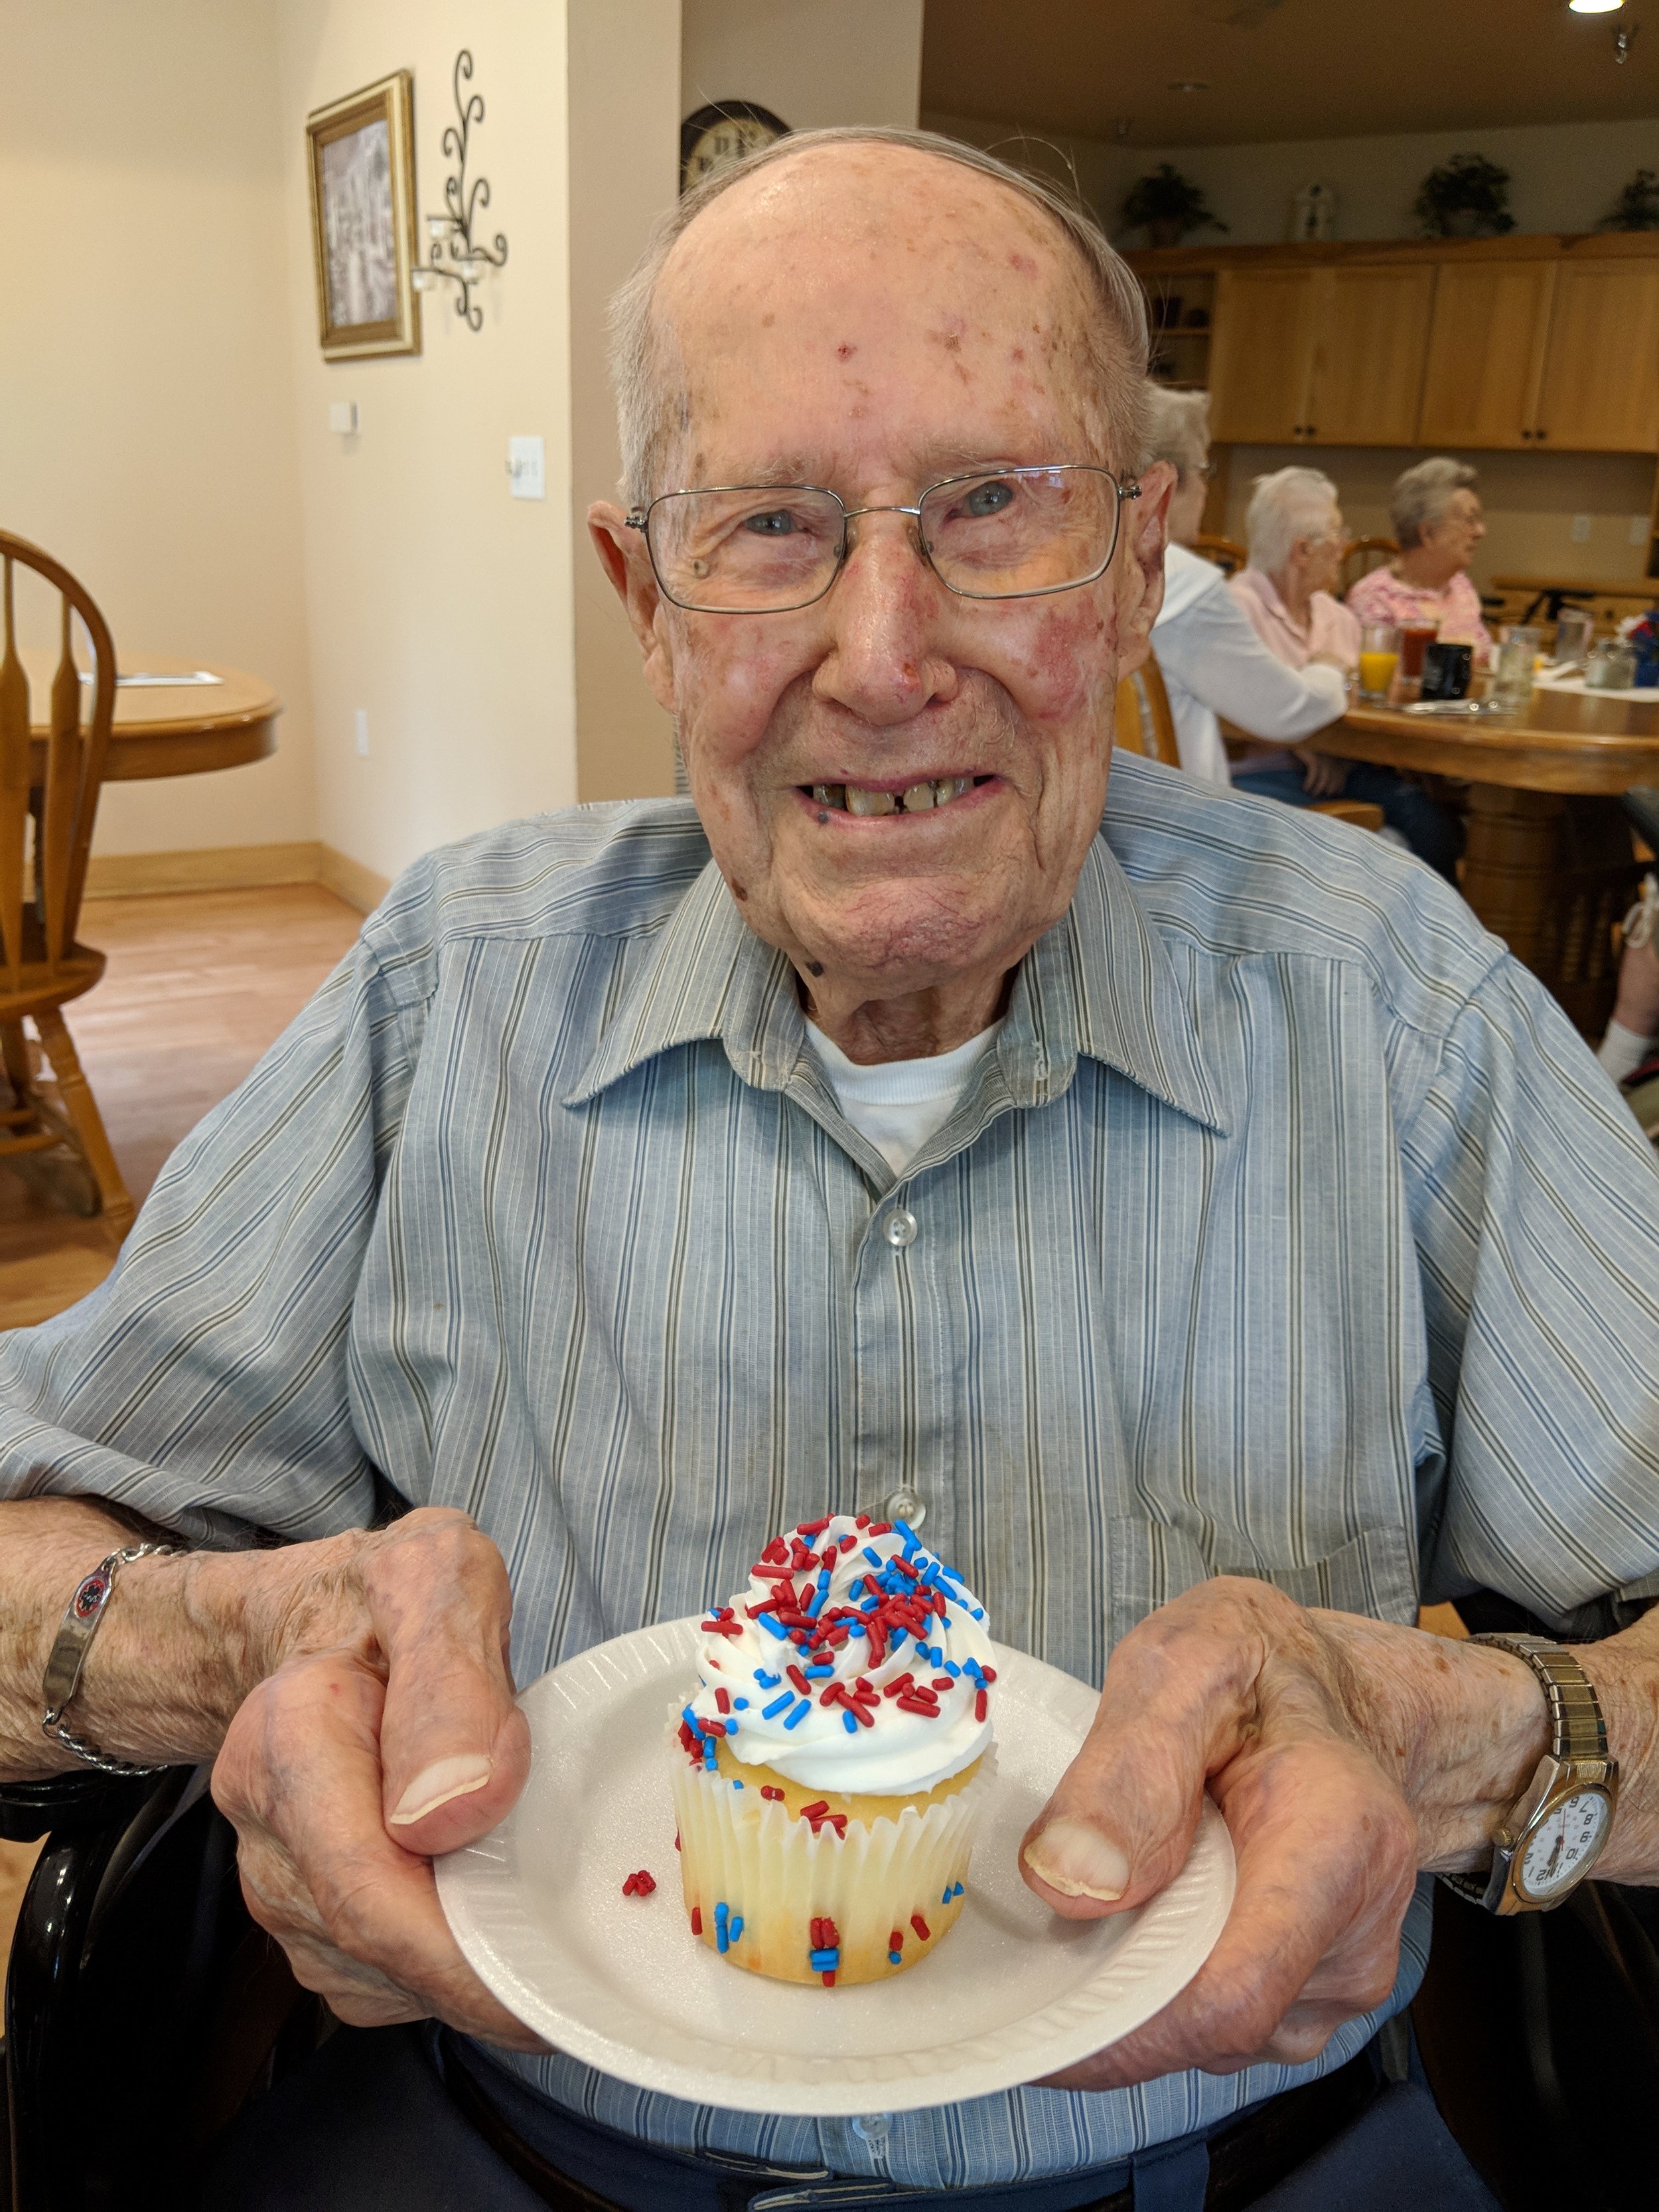 Merlin is celebrating his 101st birthday with company & cupcakes! Thank you for the special treat Merlin! 1.jpg